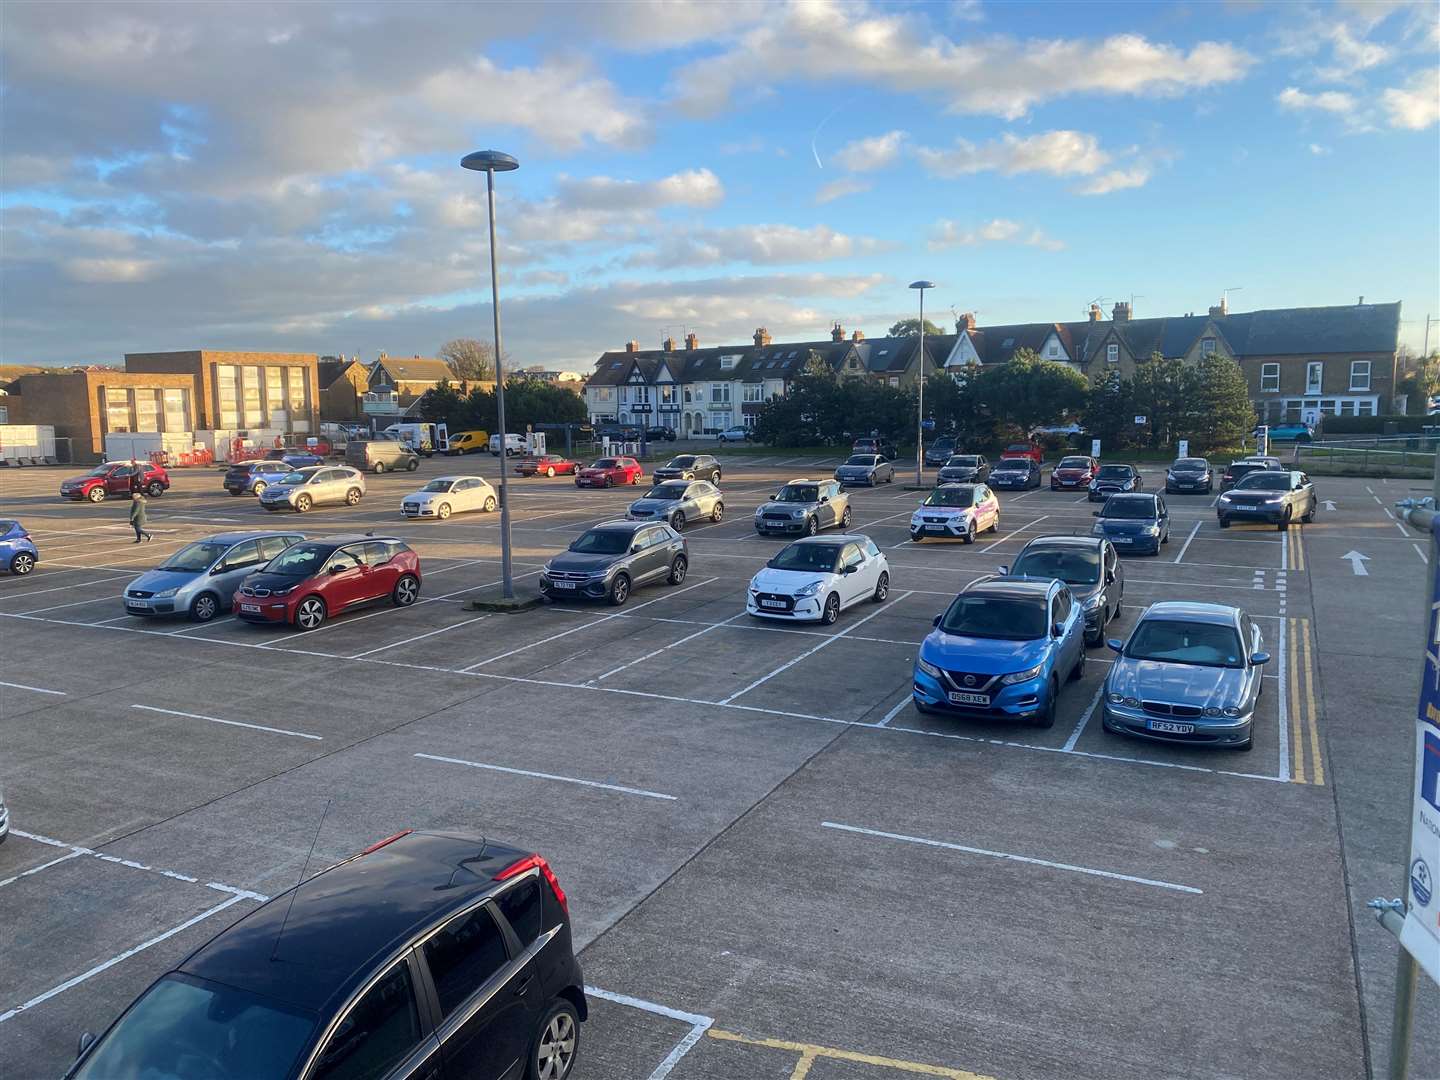 Hourly fees at Whitstable's Gorrell Tank car park would increase to £3.70 under the council's plans